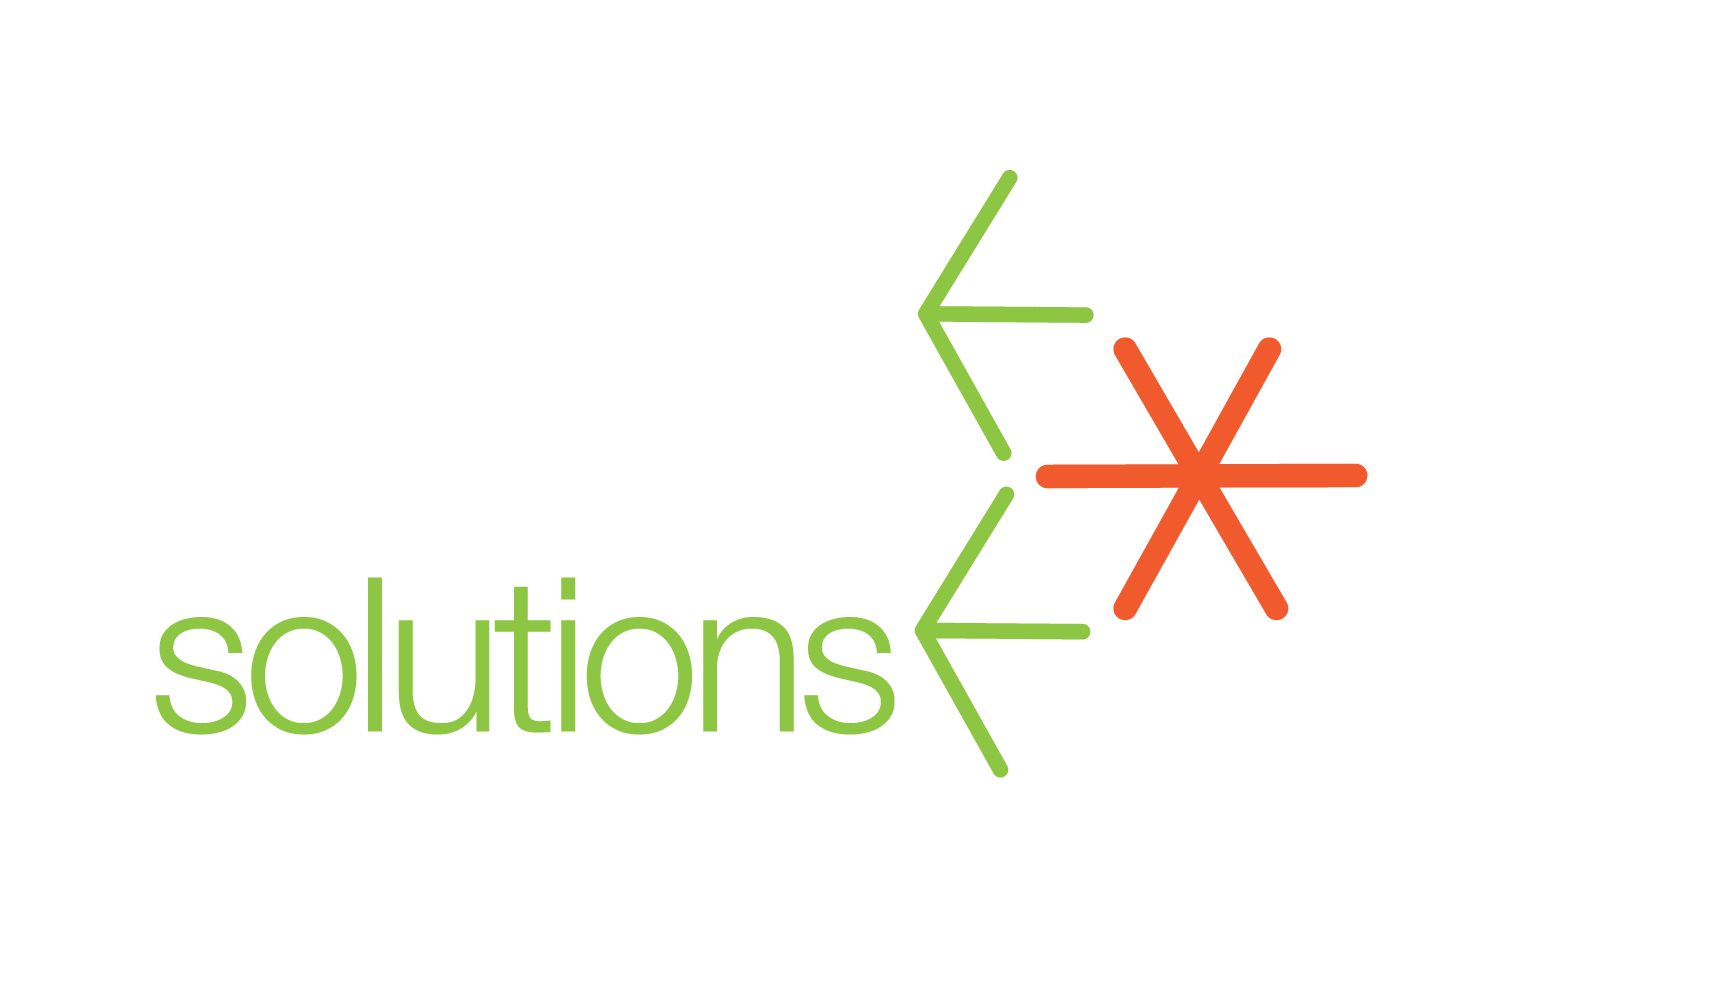 Seido Solutions - Sustainable Facility Management